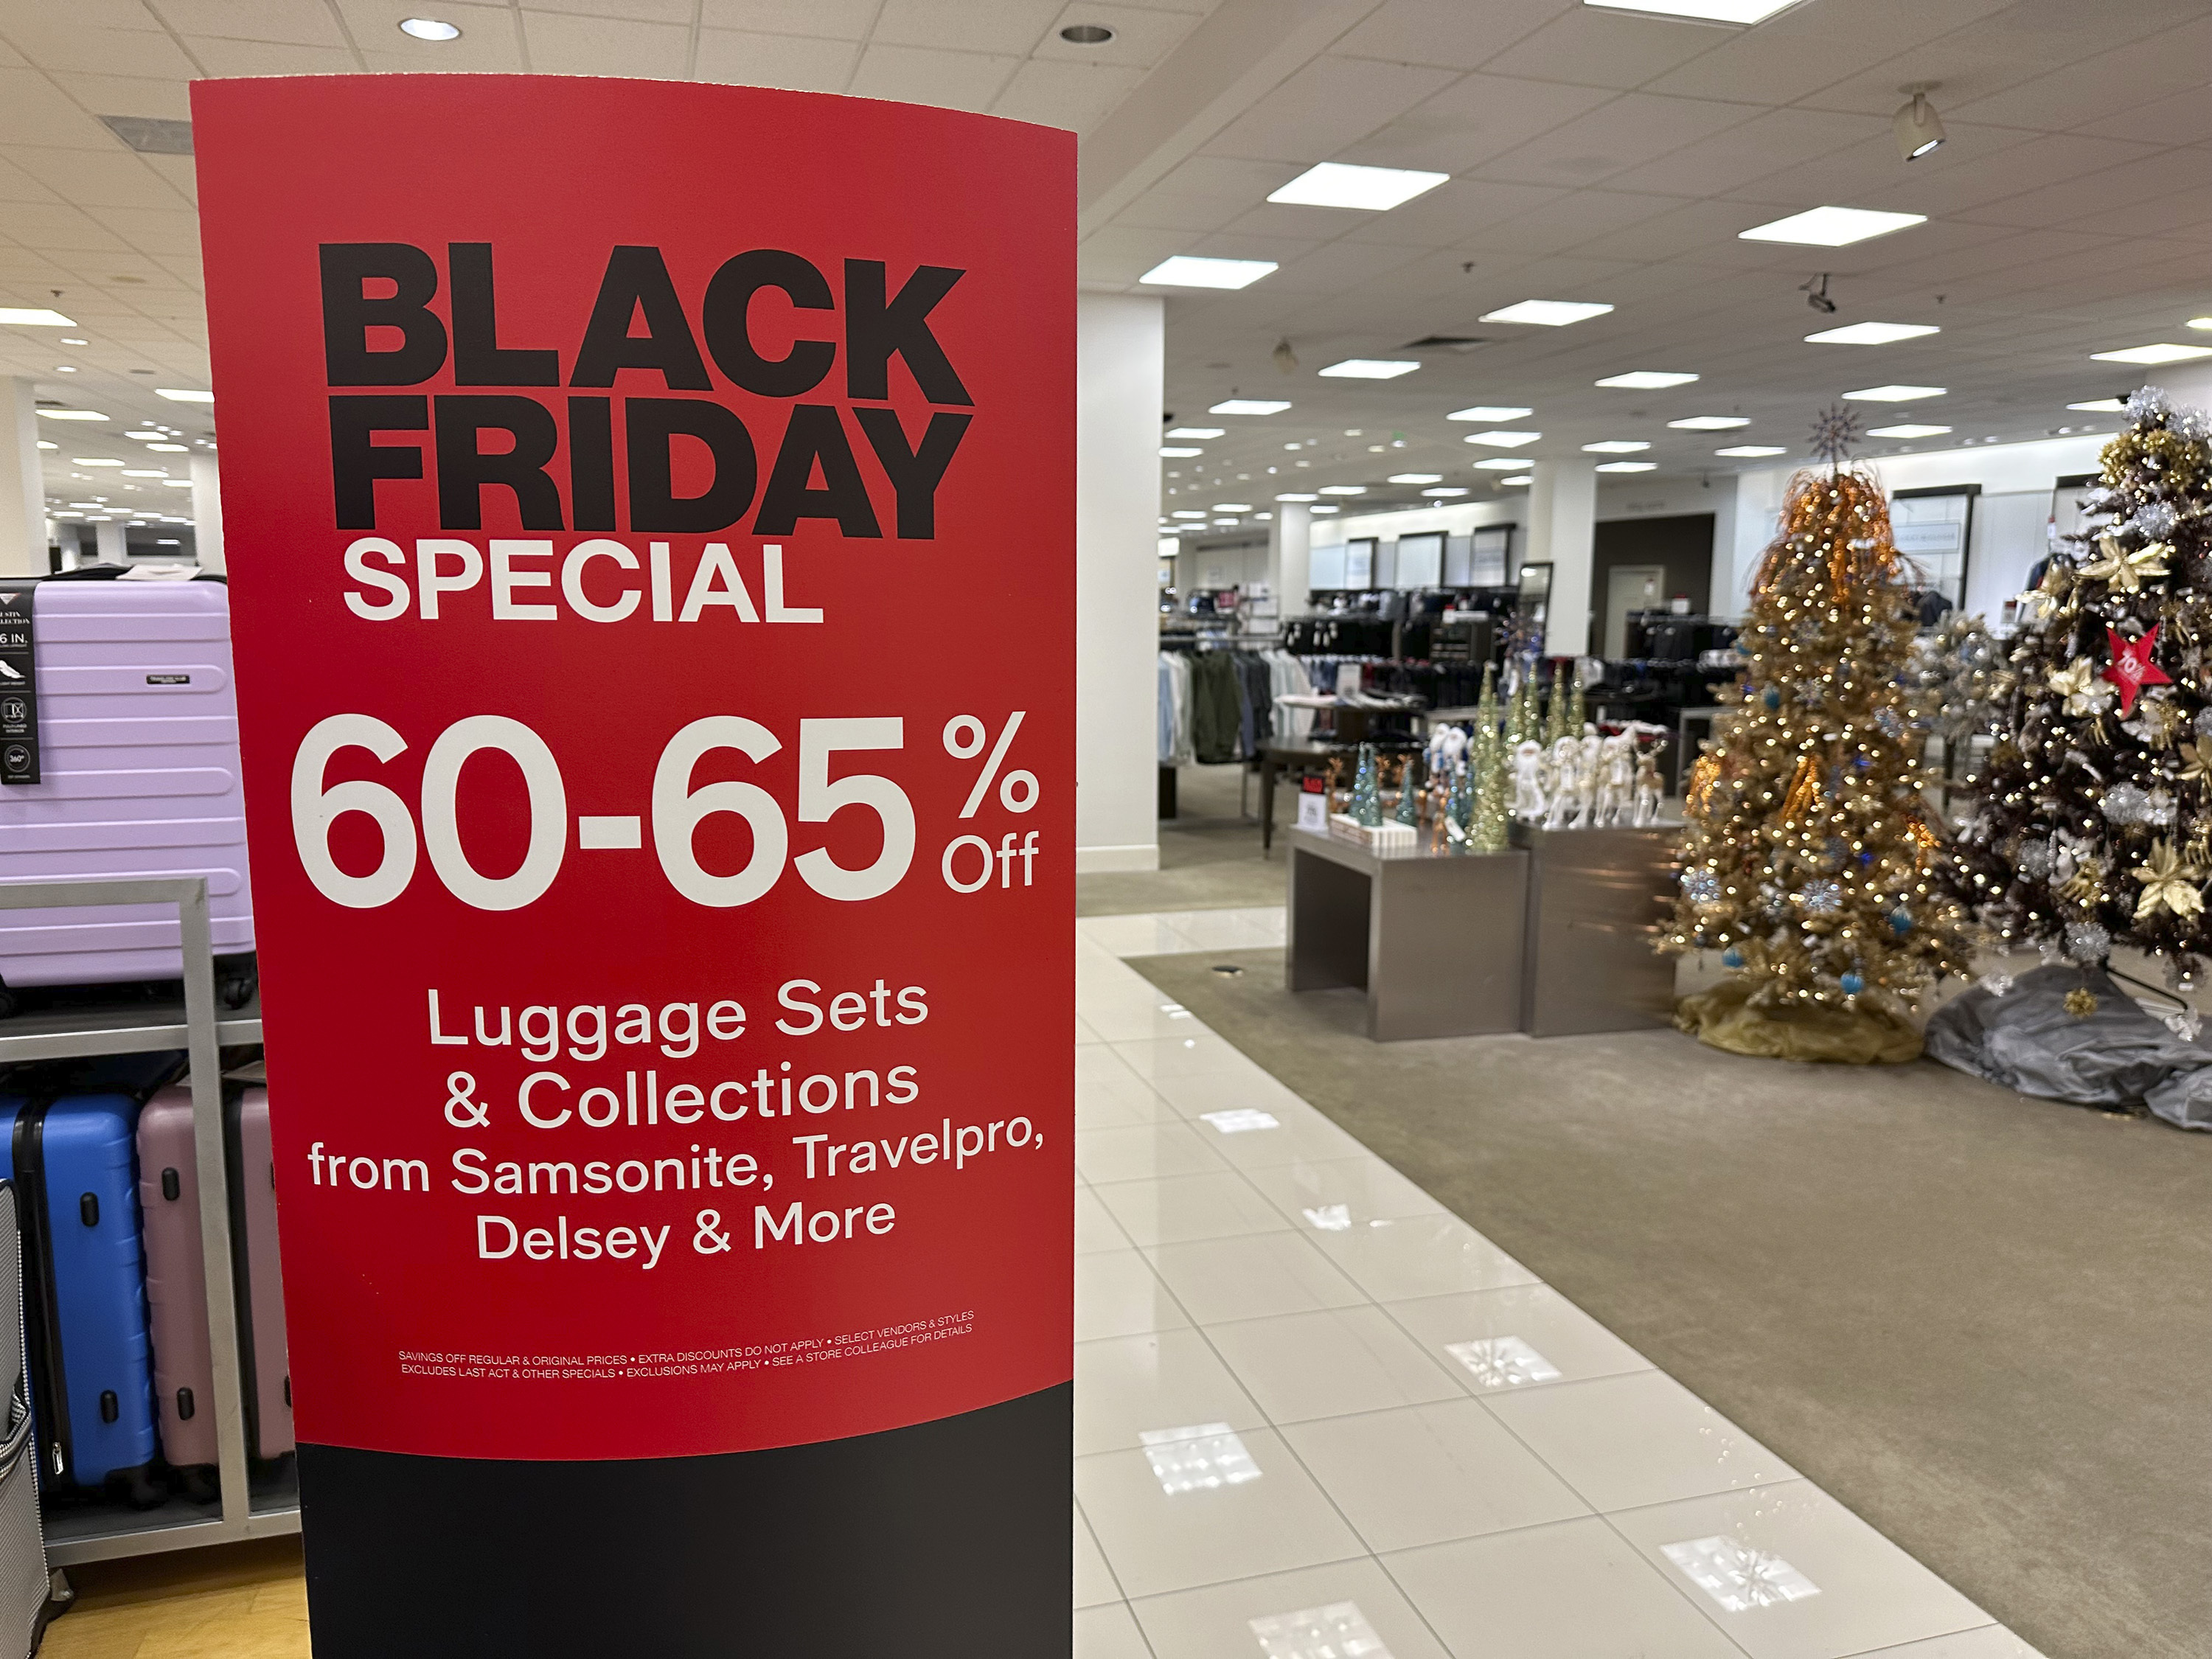 2023 Peacock Black Friday deal: Get a one-year Premium plan for only $20